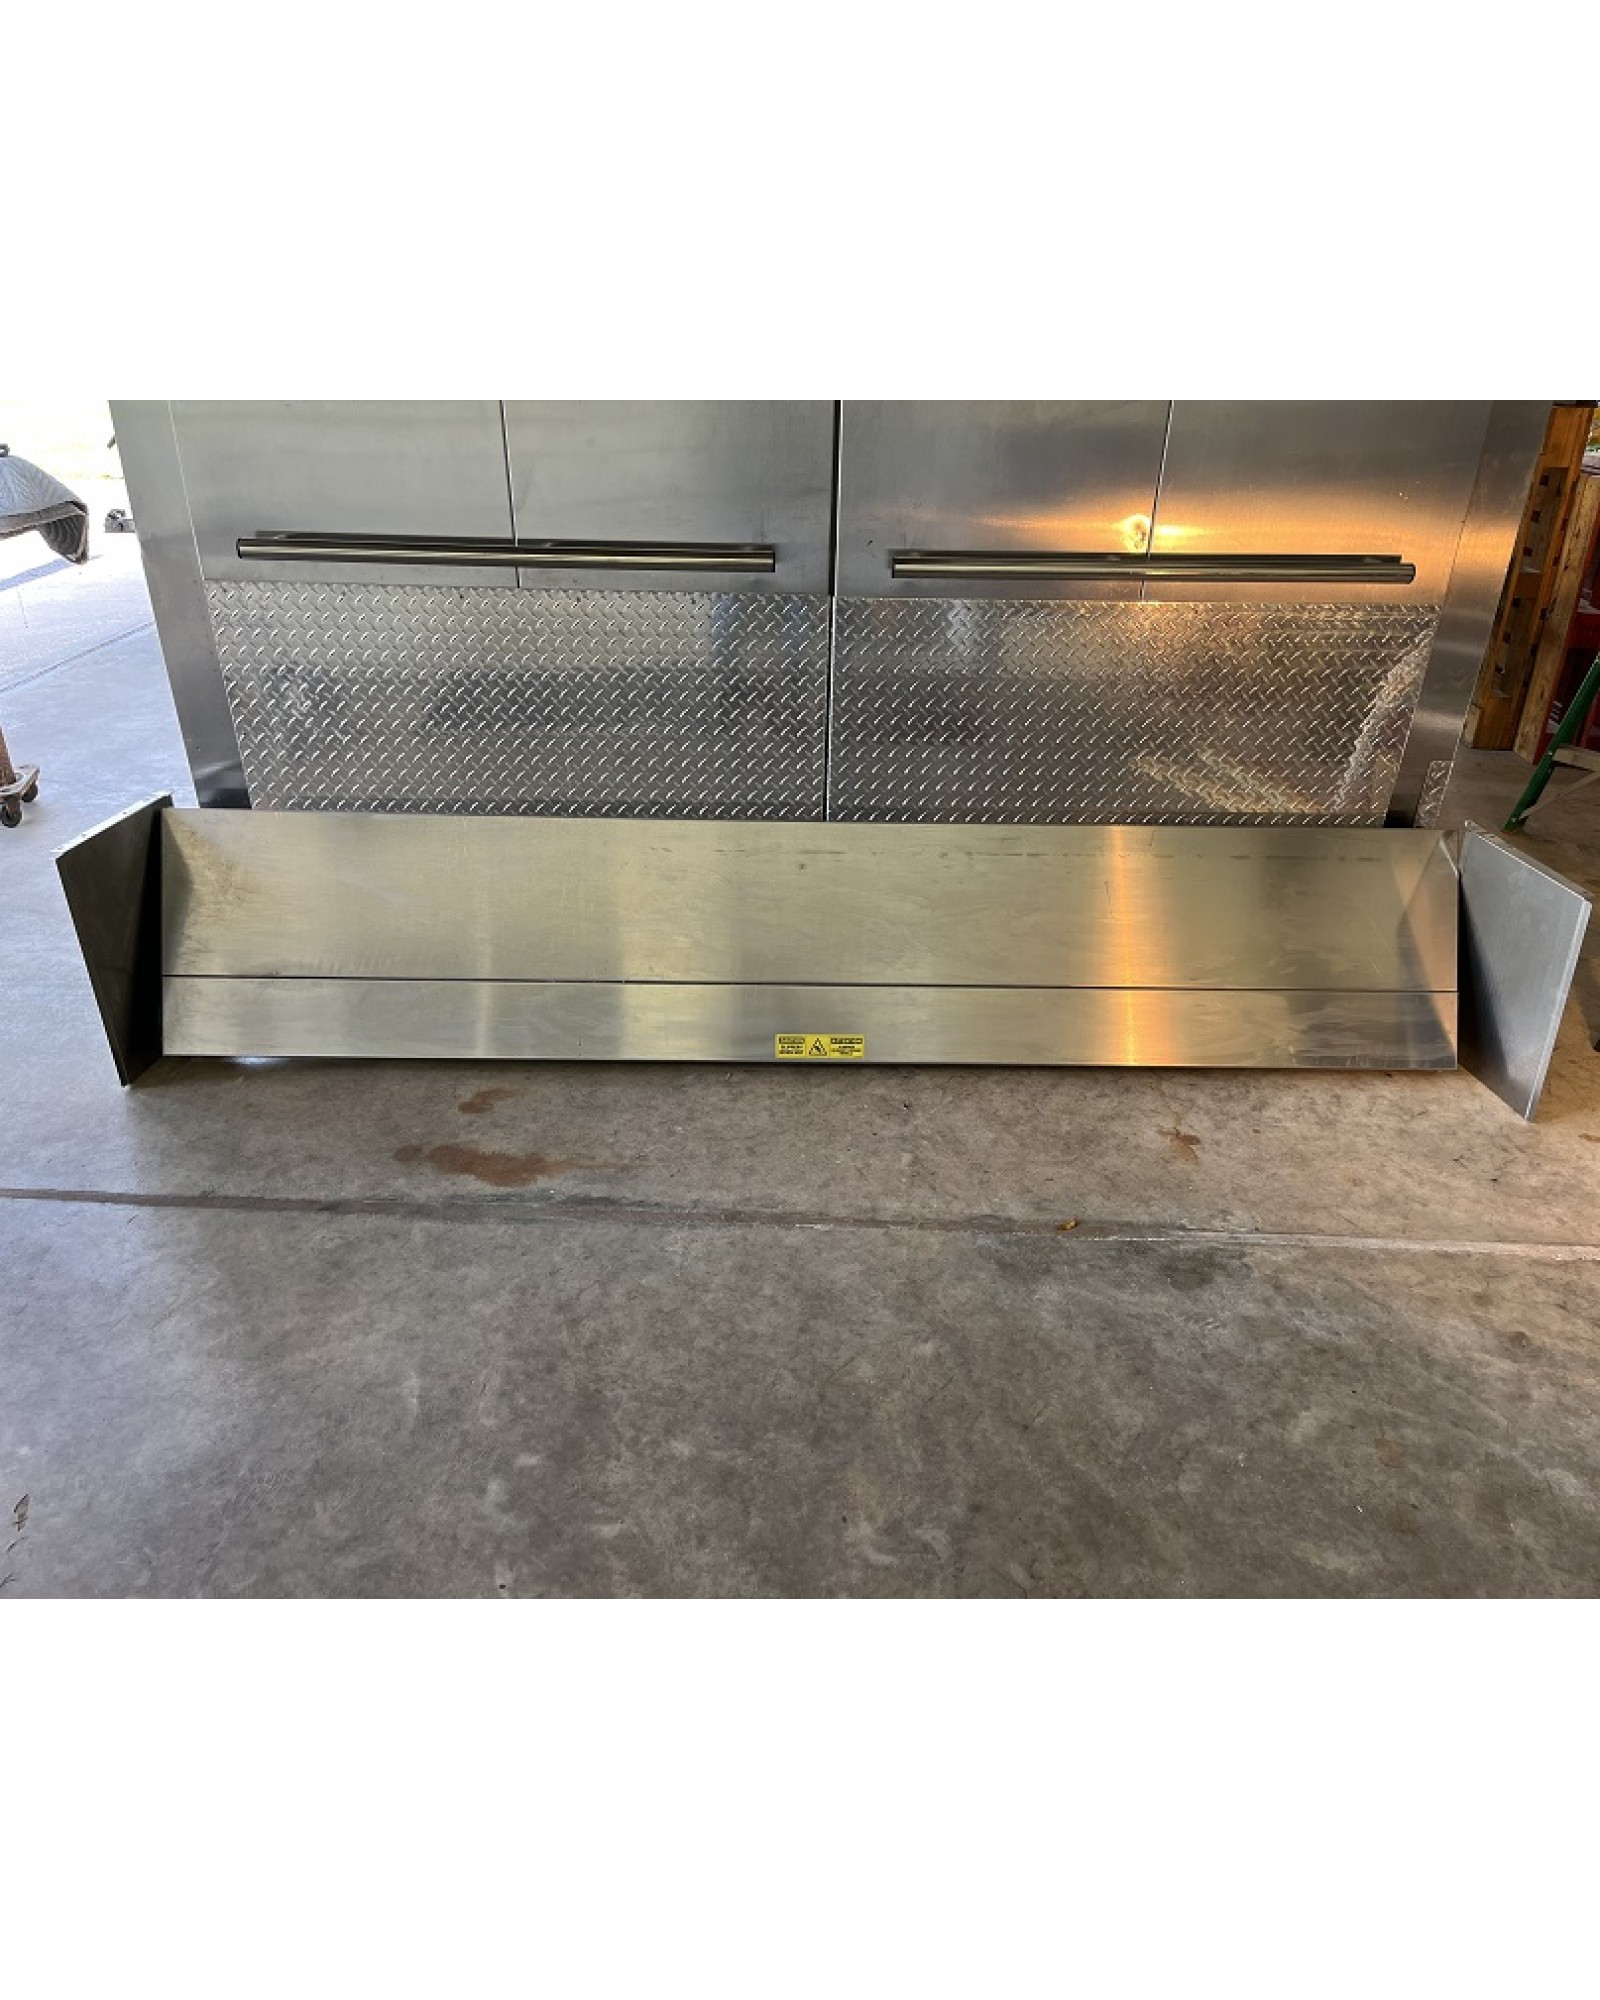 Baxter Proofer Roll-In Cabinet (USED)